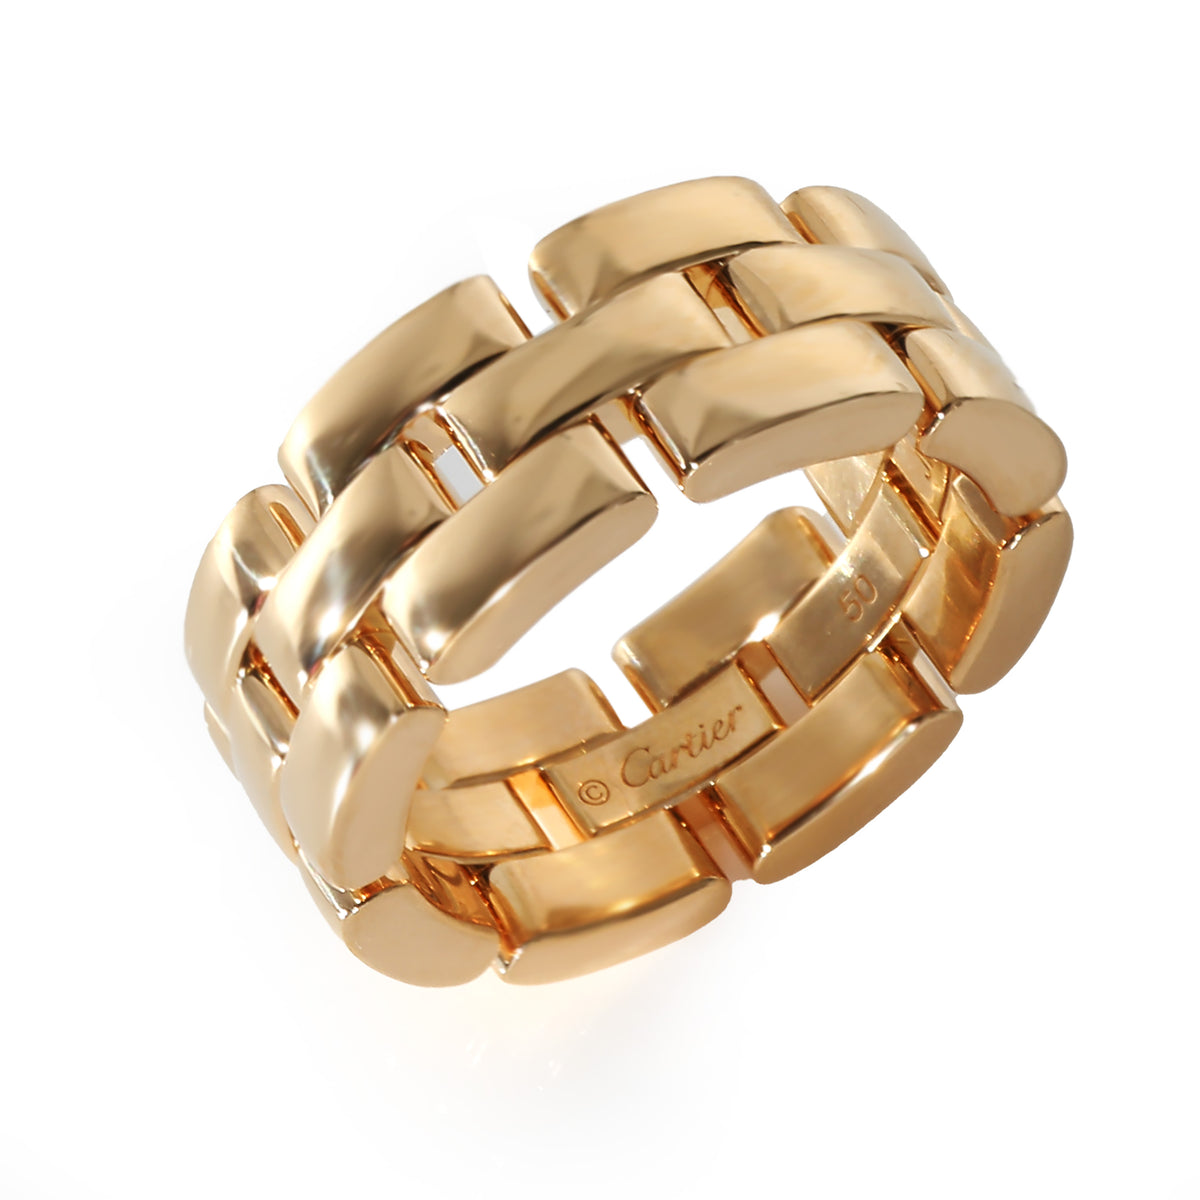 Maillon Panthere Band in 18k Yellow Gold